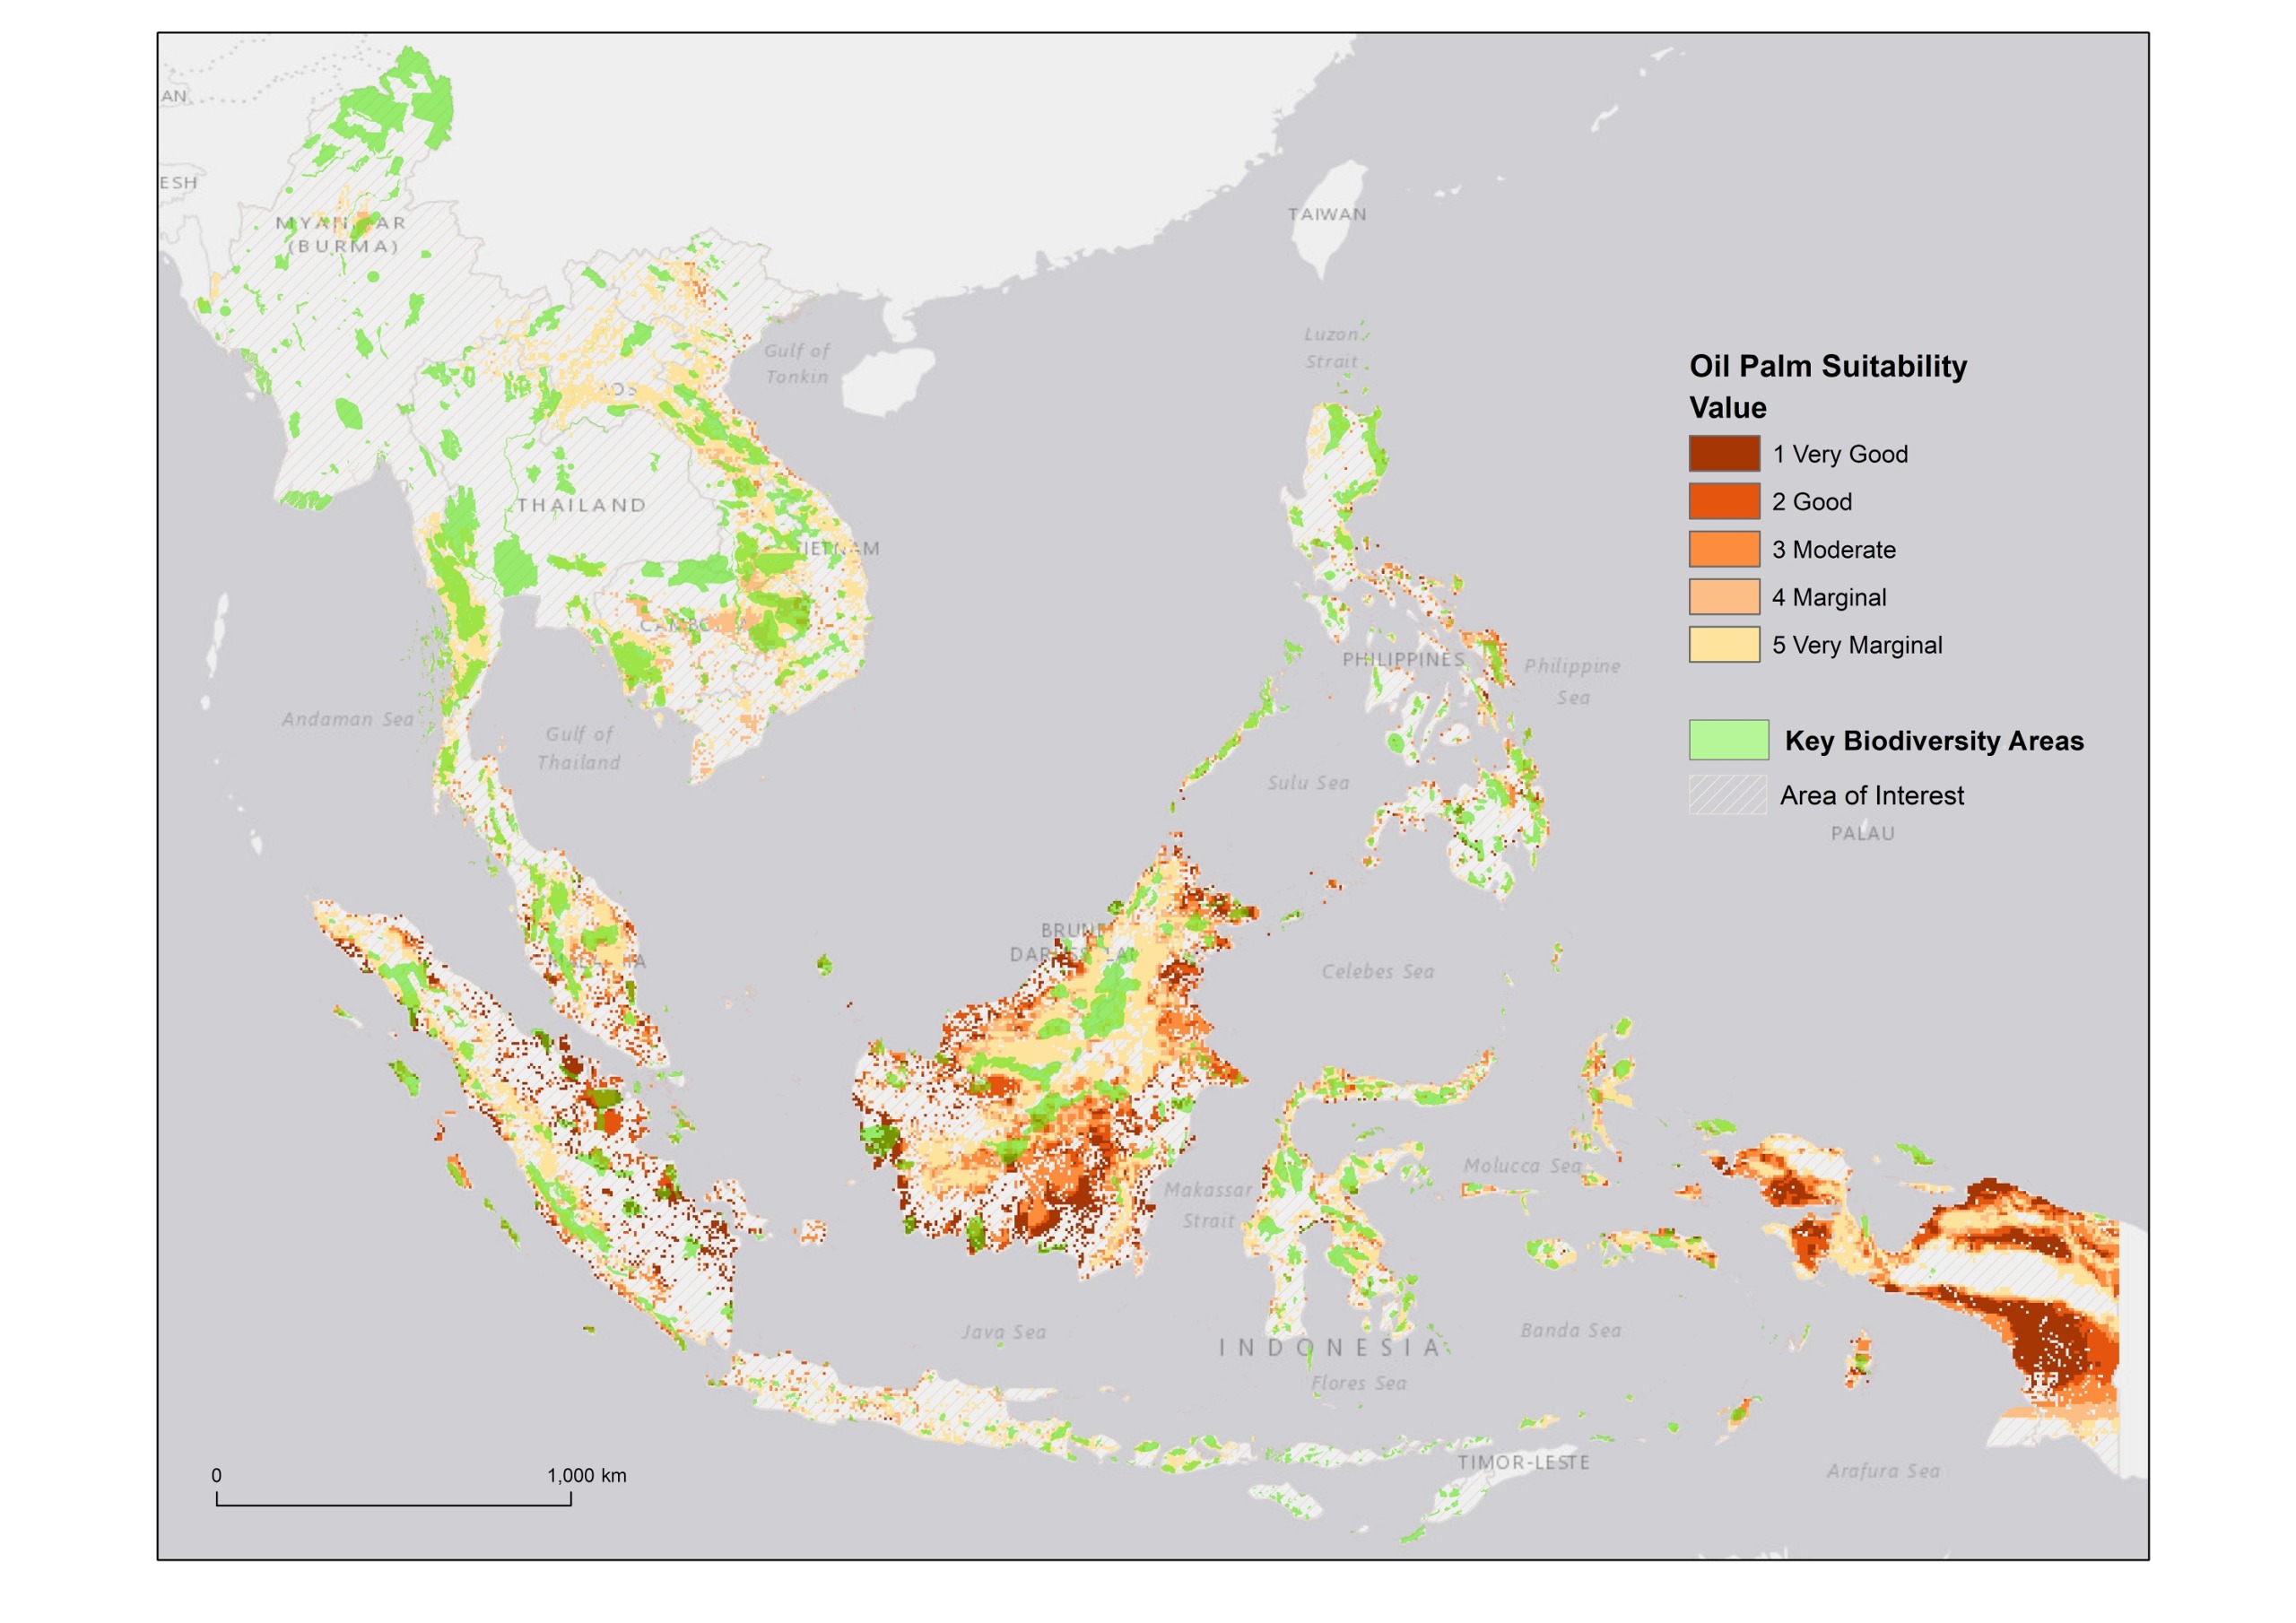 A composite map of Southeast Asia showing Key Biodiversity Areas and areas of potential oil palm expansion. "Suitability" here refers only to ecological factors like climate and soil. Credit: Hennekam, Sarira, Koh)